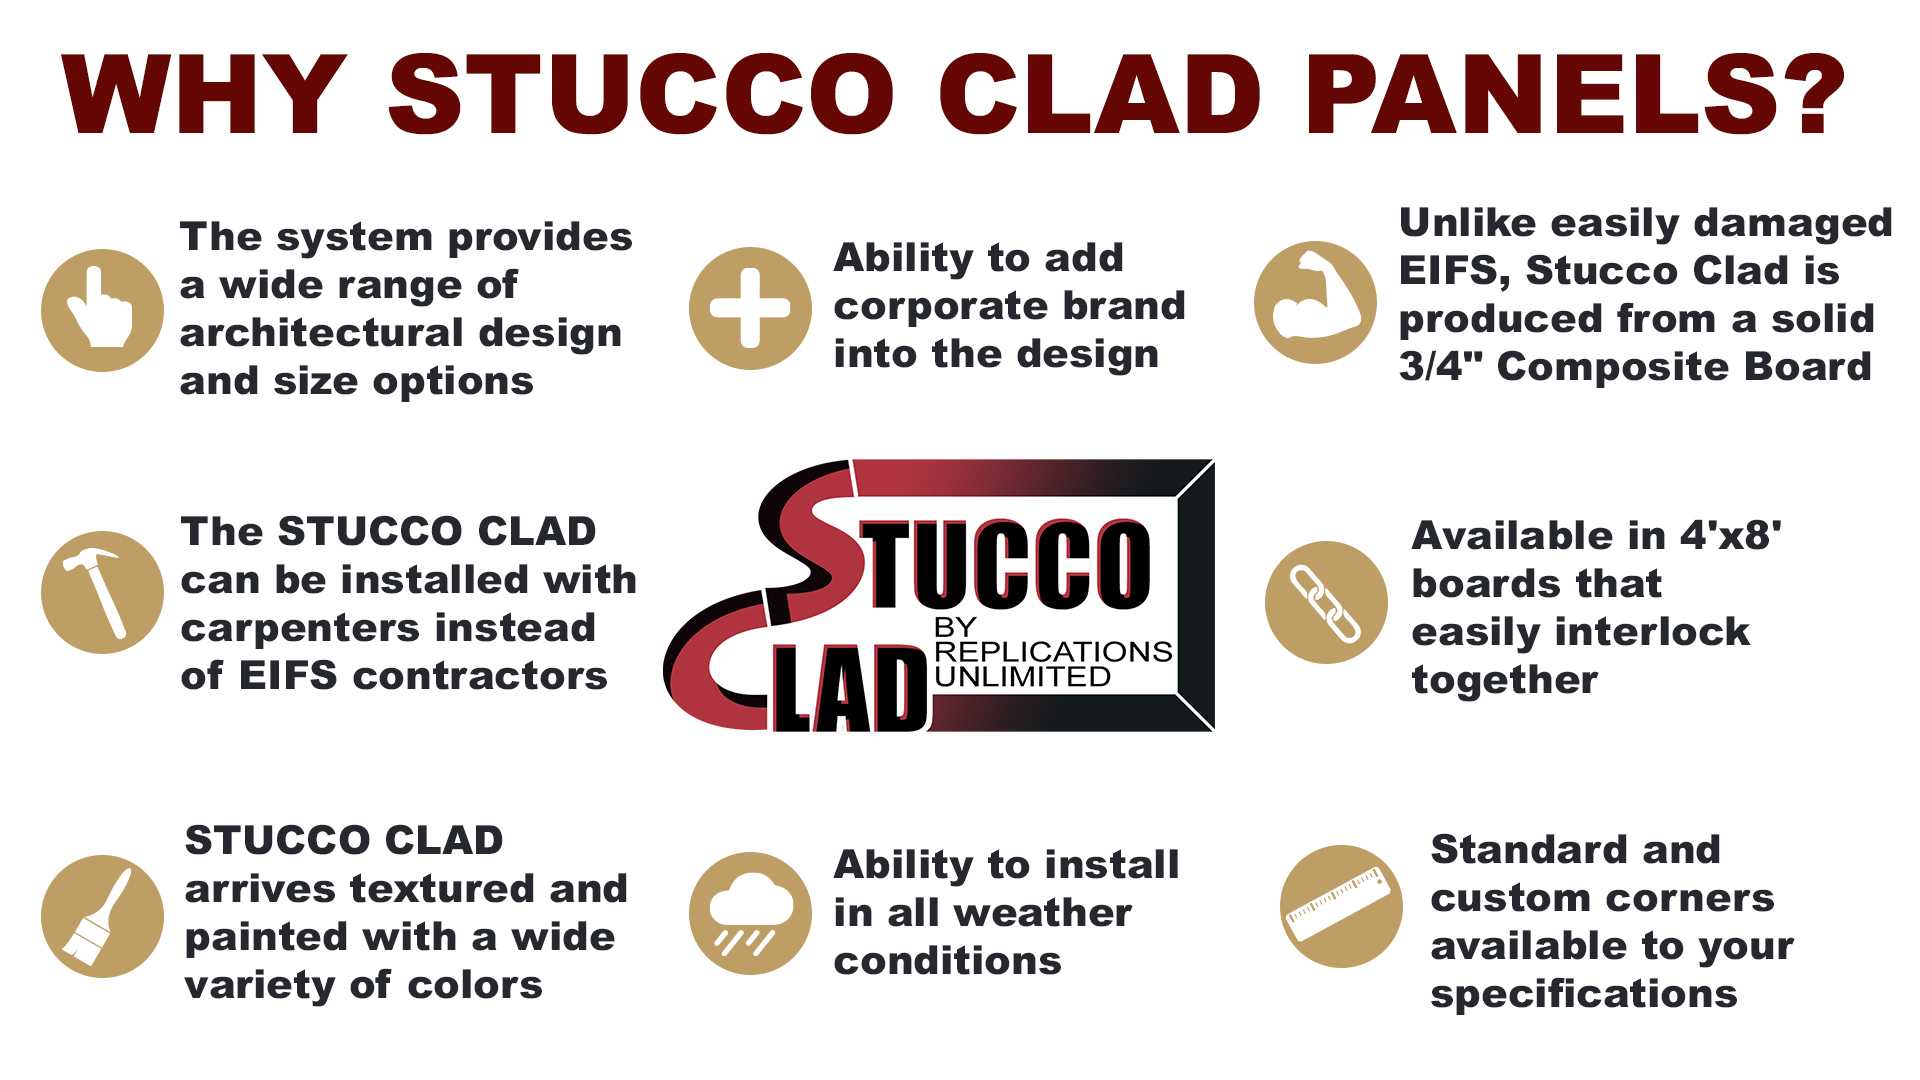 Why Stucco Clad Panels